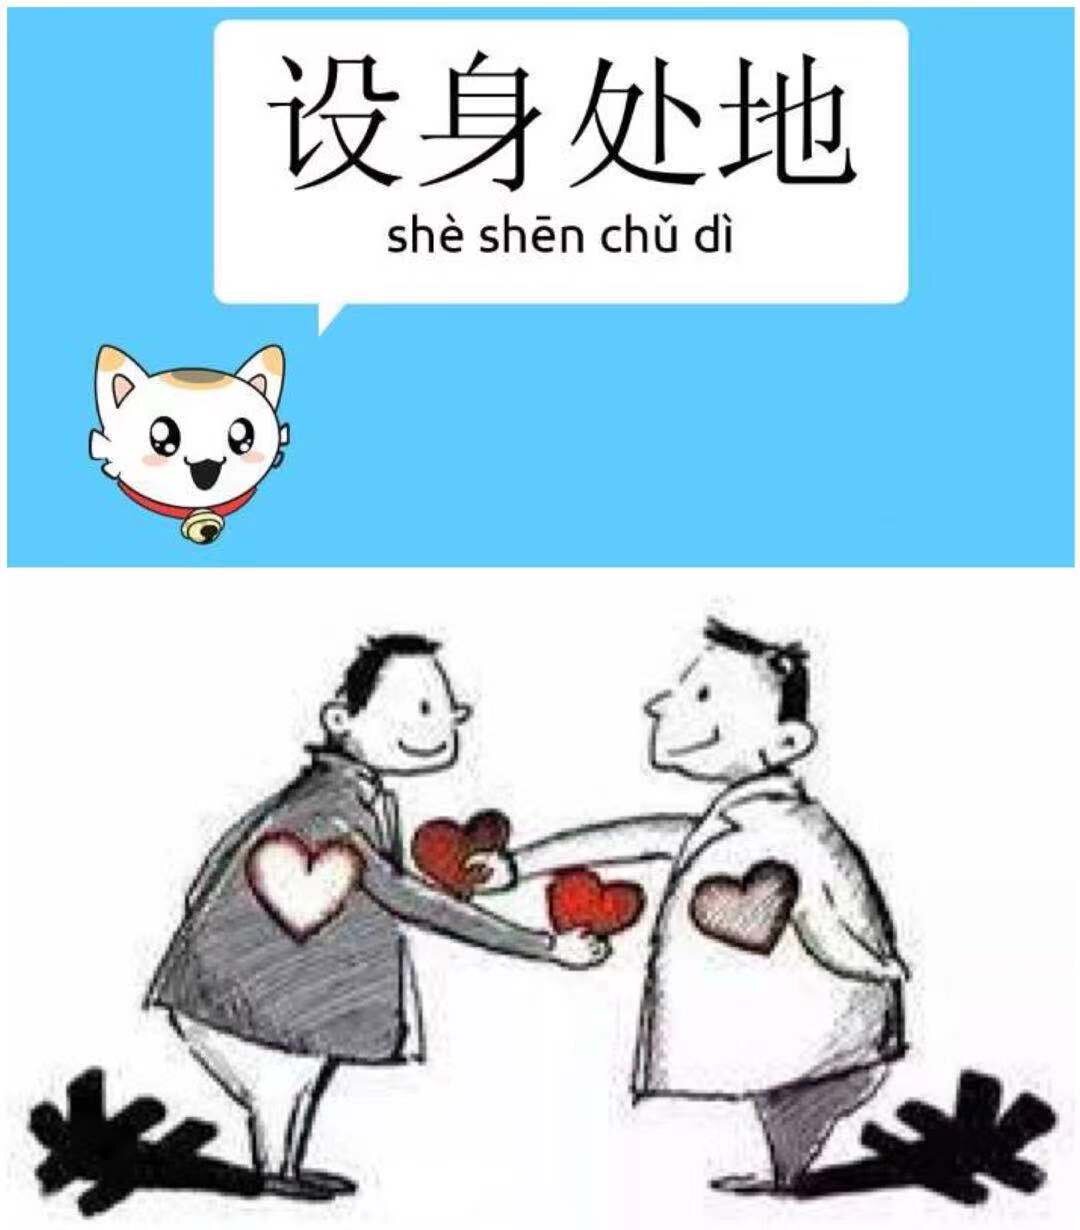 Salome Chen's favourite phrase in Chinese: 设身处地 [shèshēn chǔ dì], which is about having empathy for others.